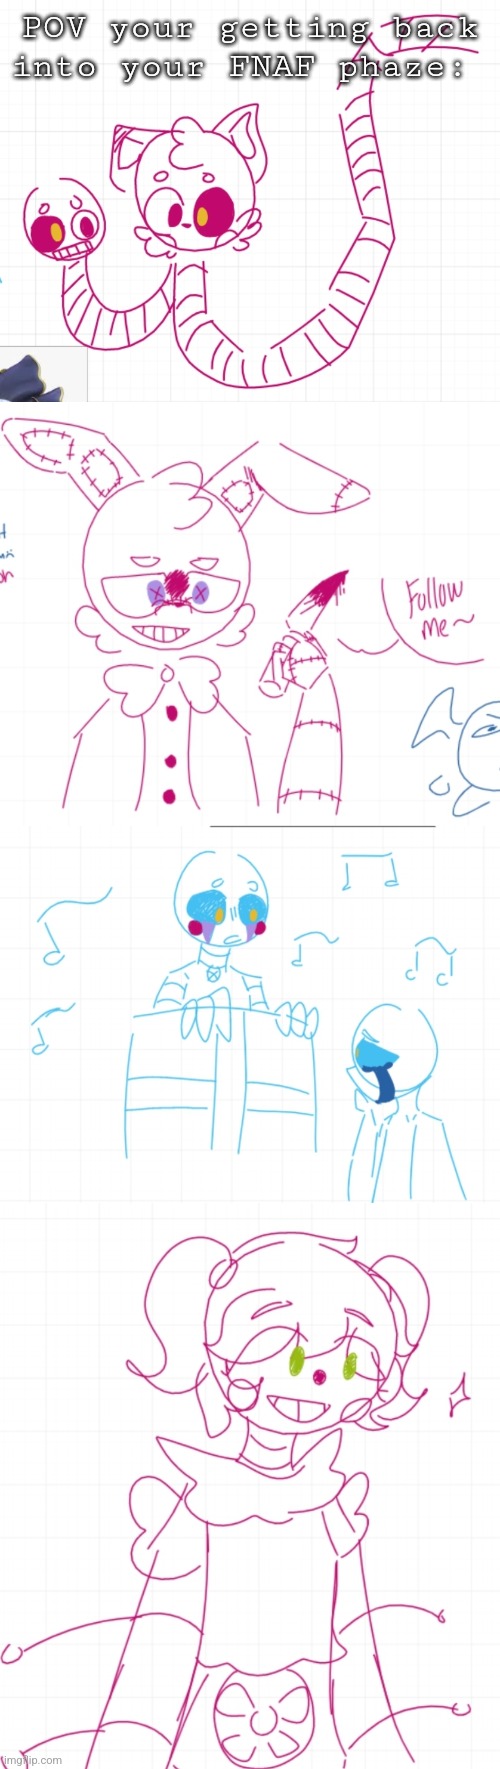 Some fnaf doodles of mine, from Whiteboard | POV your getting back into your FNAF phaze: | image tagged in whiteboard,fnaf,drawings,why are you reading the tags | made w/ Imgflip meme maker